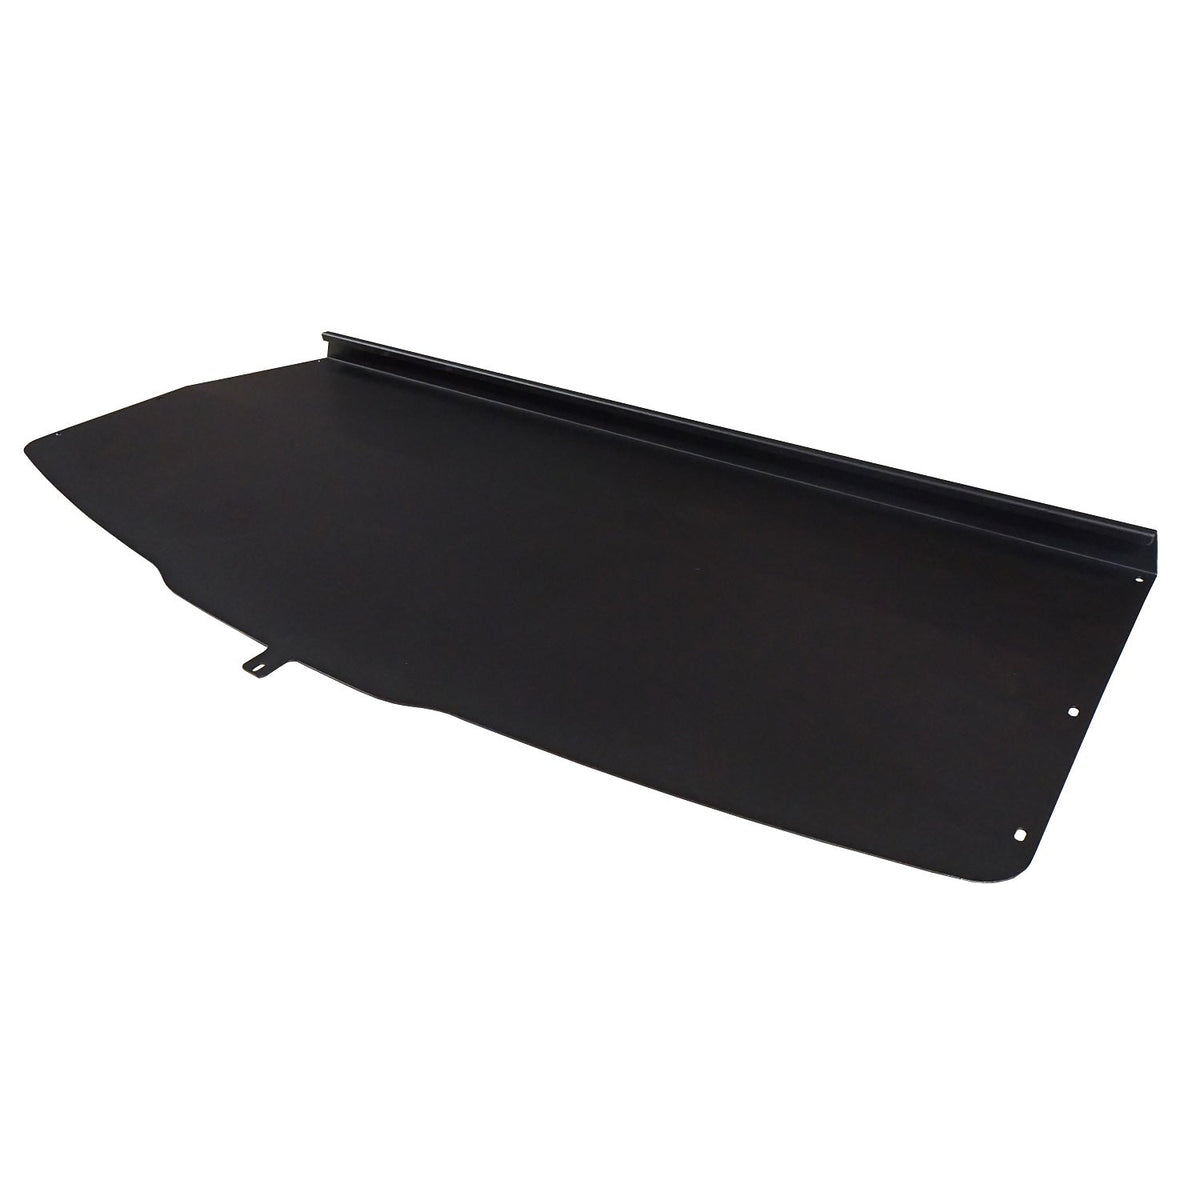 2021+ Ford Transit Headliner Shelf - Fits Mid and High Roof Vans